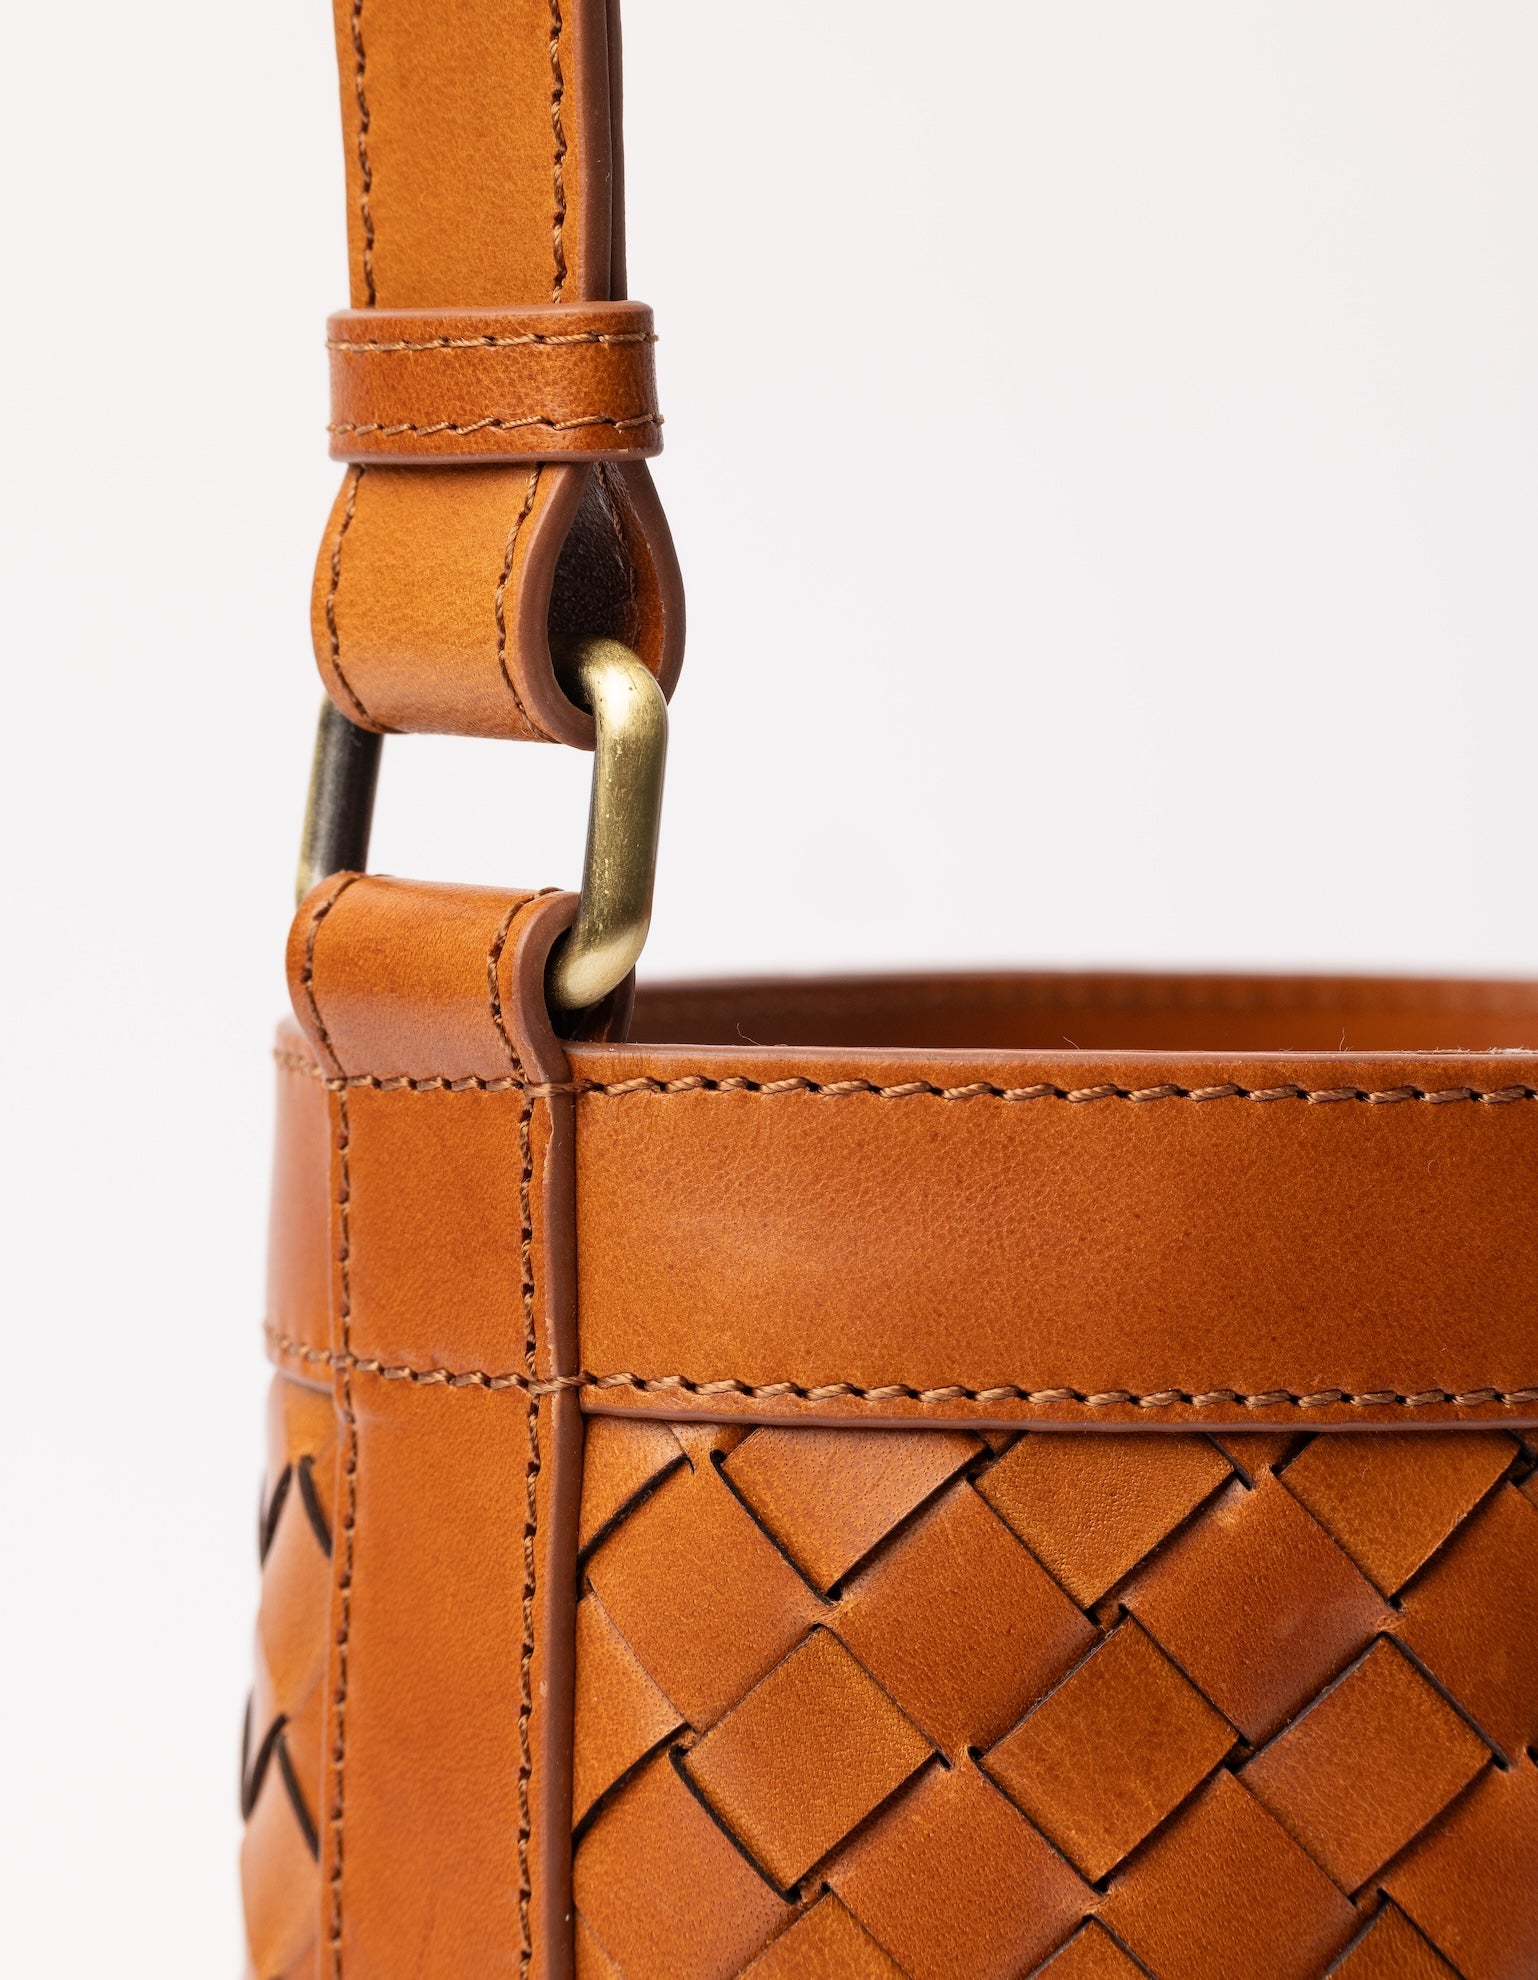 Zola woven leather bucket bag - close-up of details